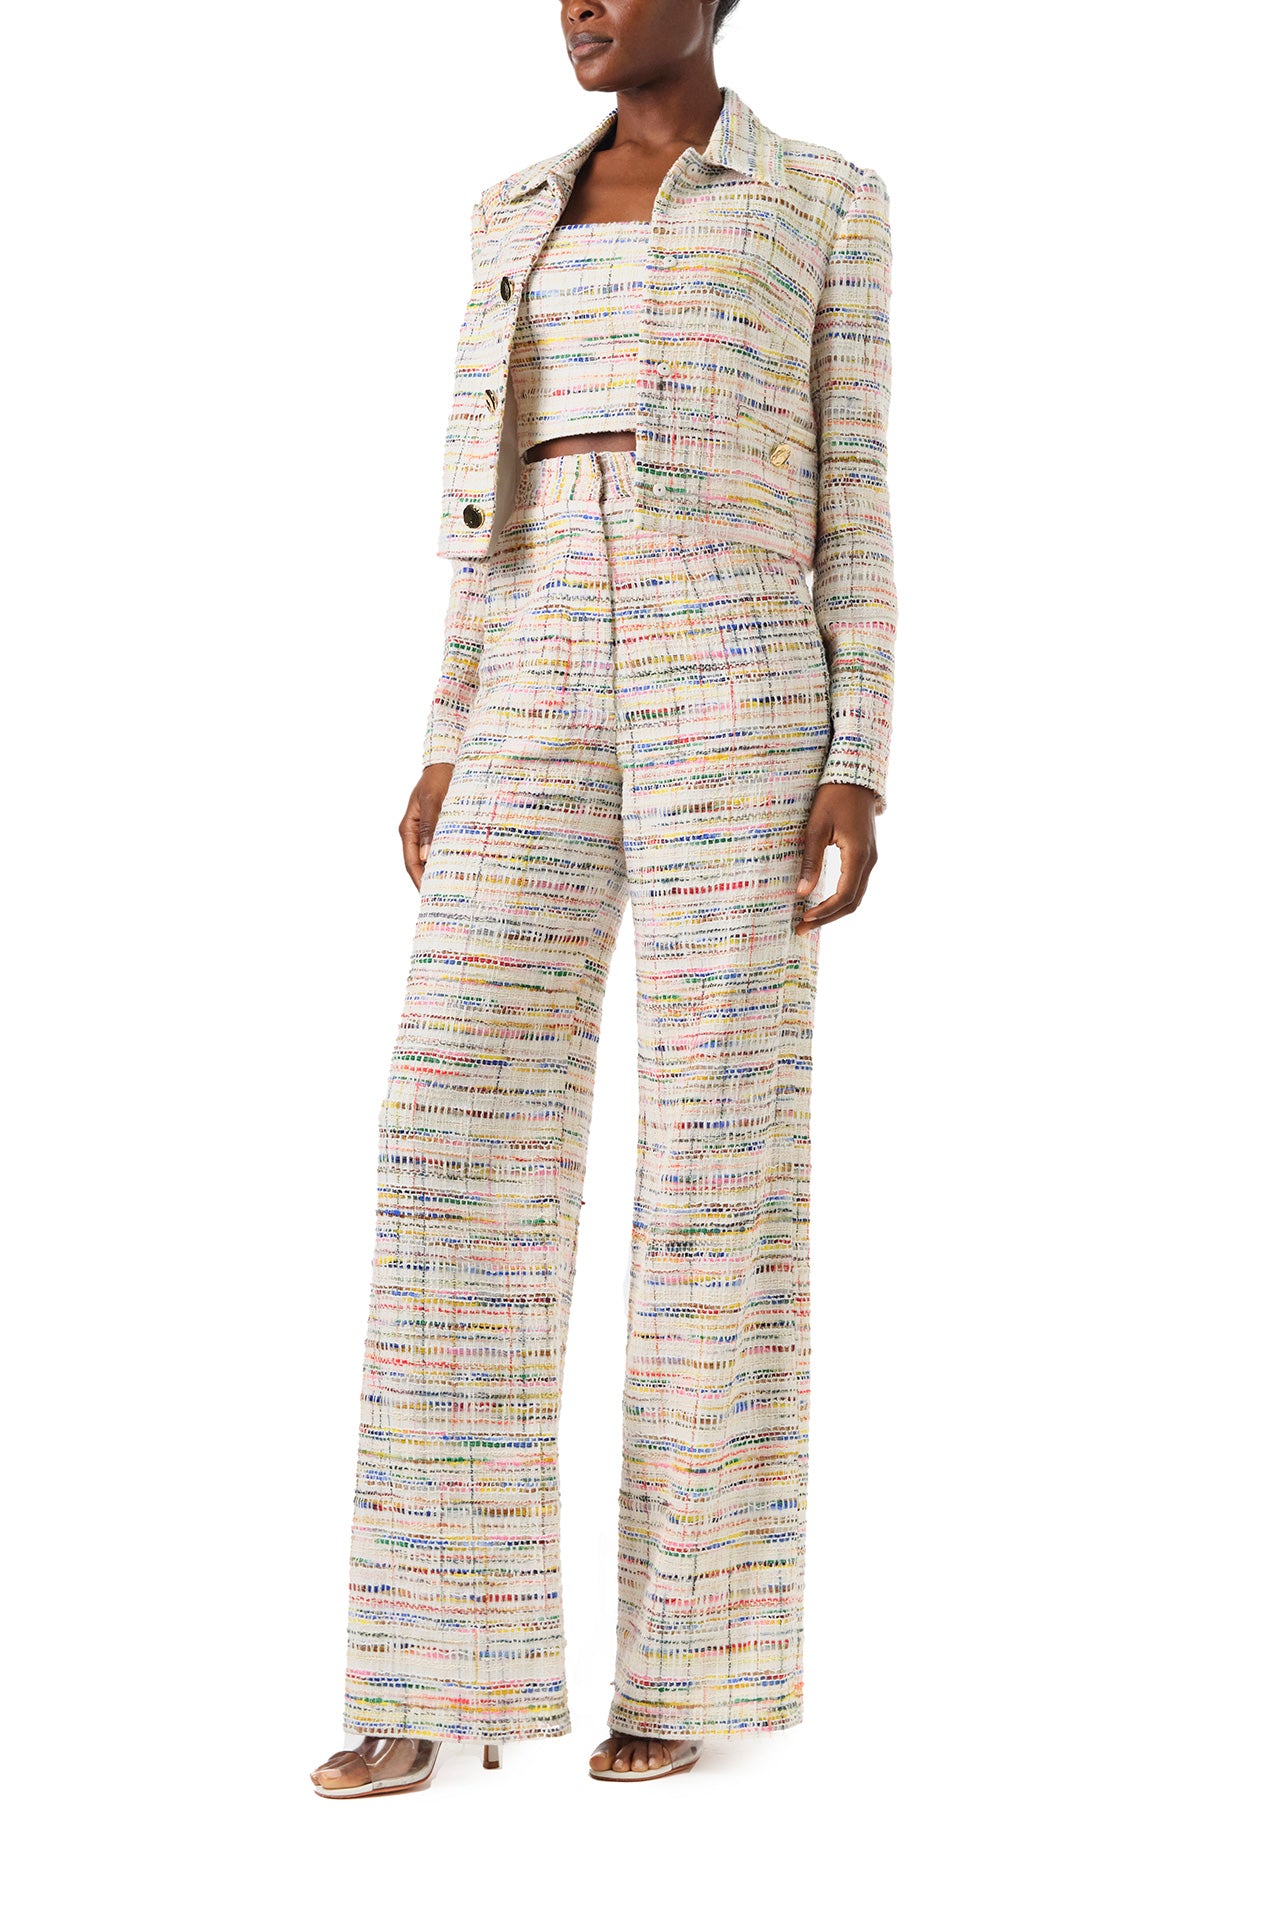 Monique Lhuillier Spring 2024 high waisted trouser with pockets in multi color tweed - left side.